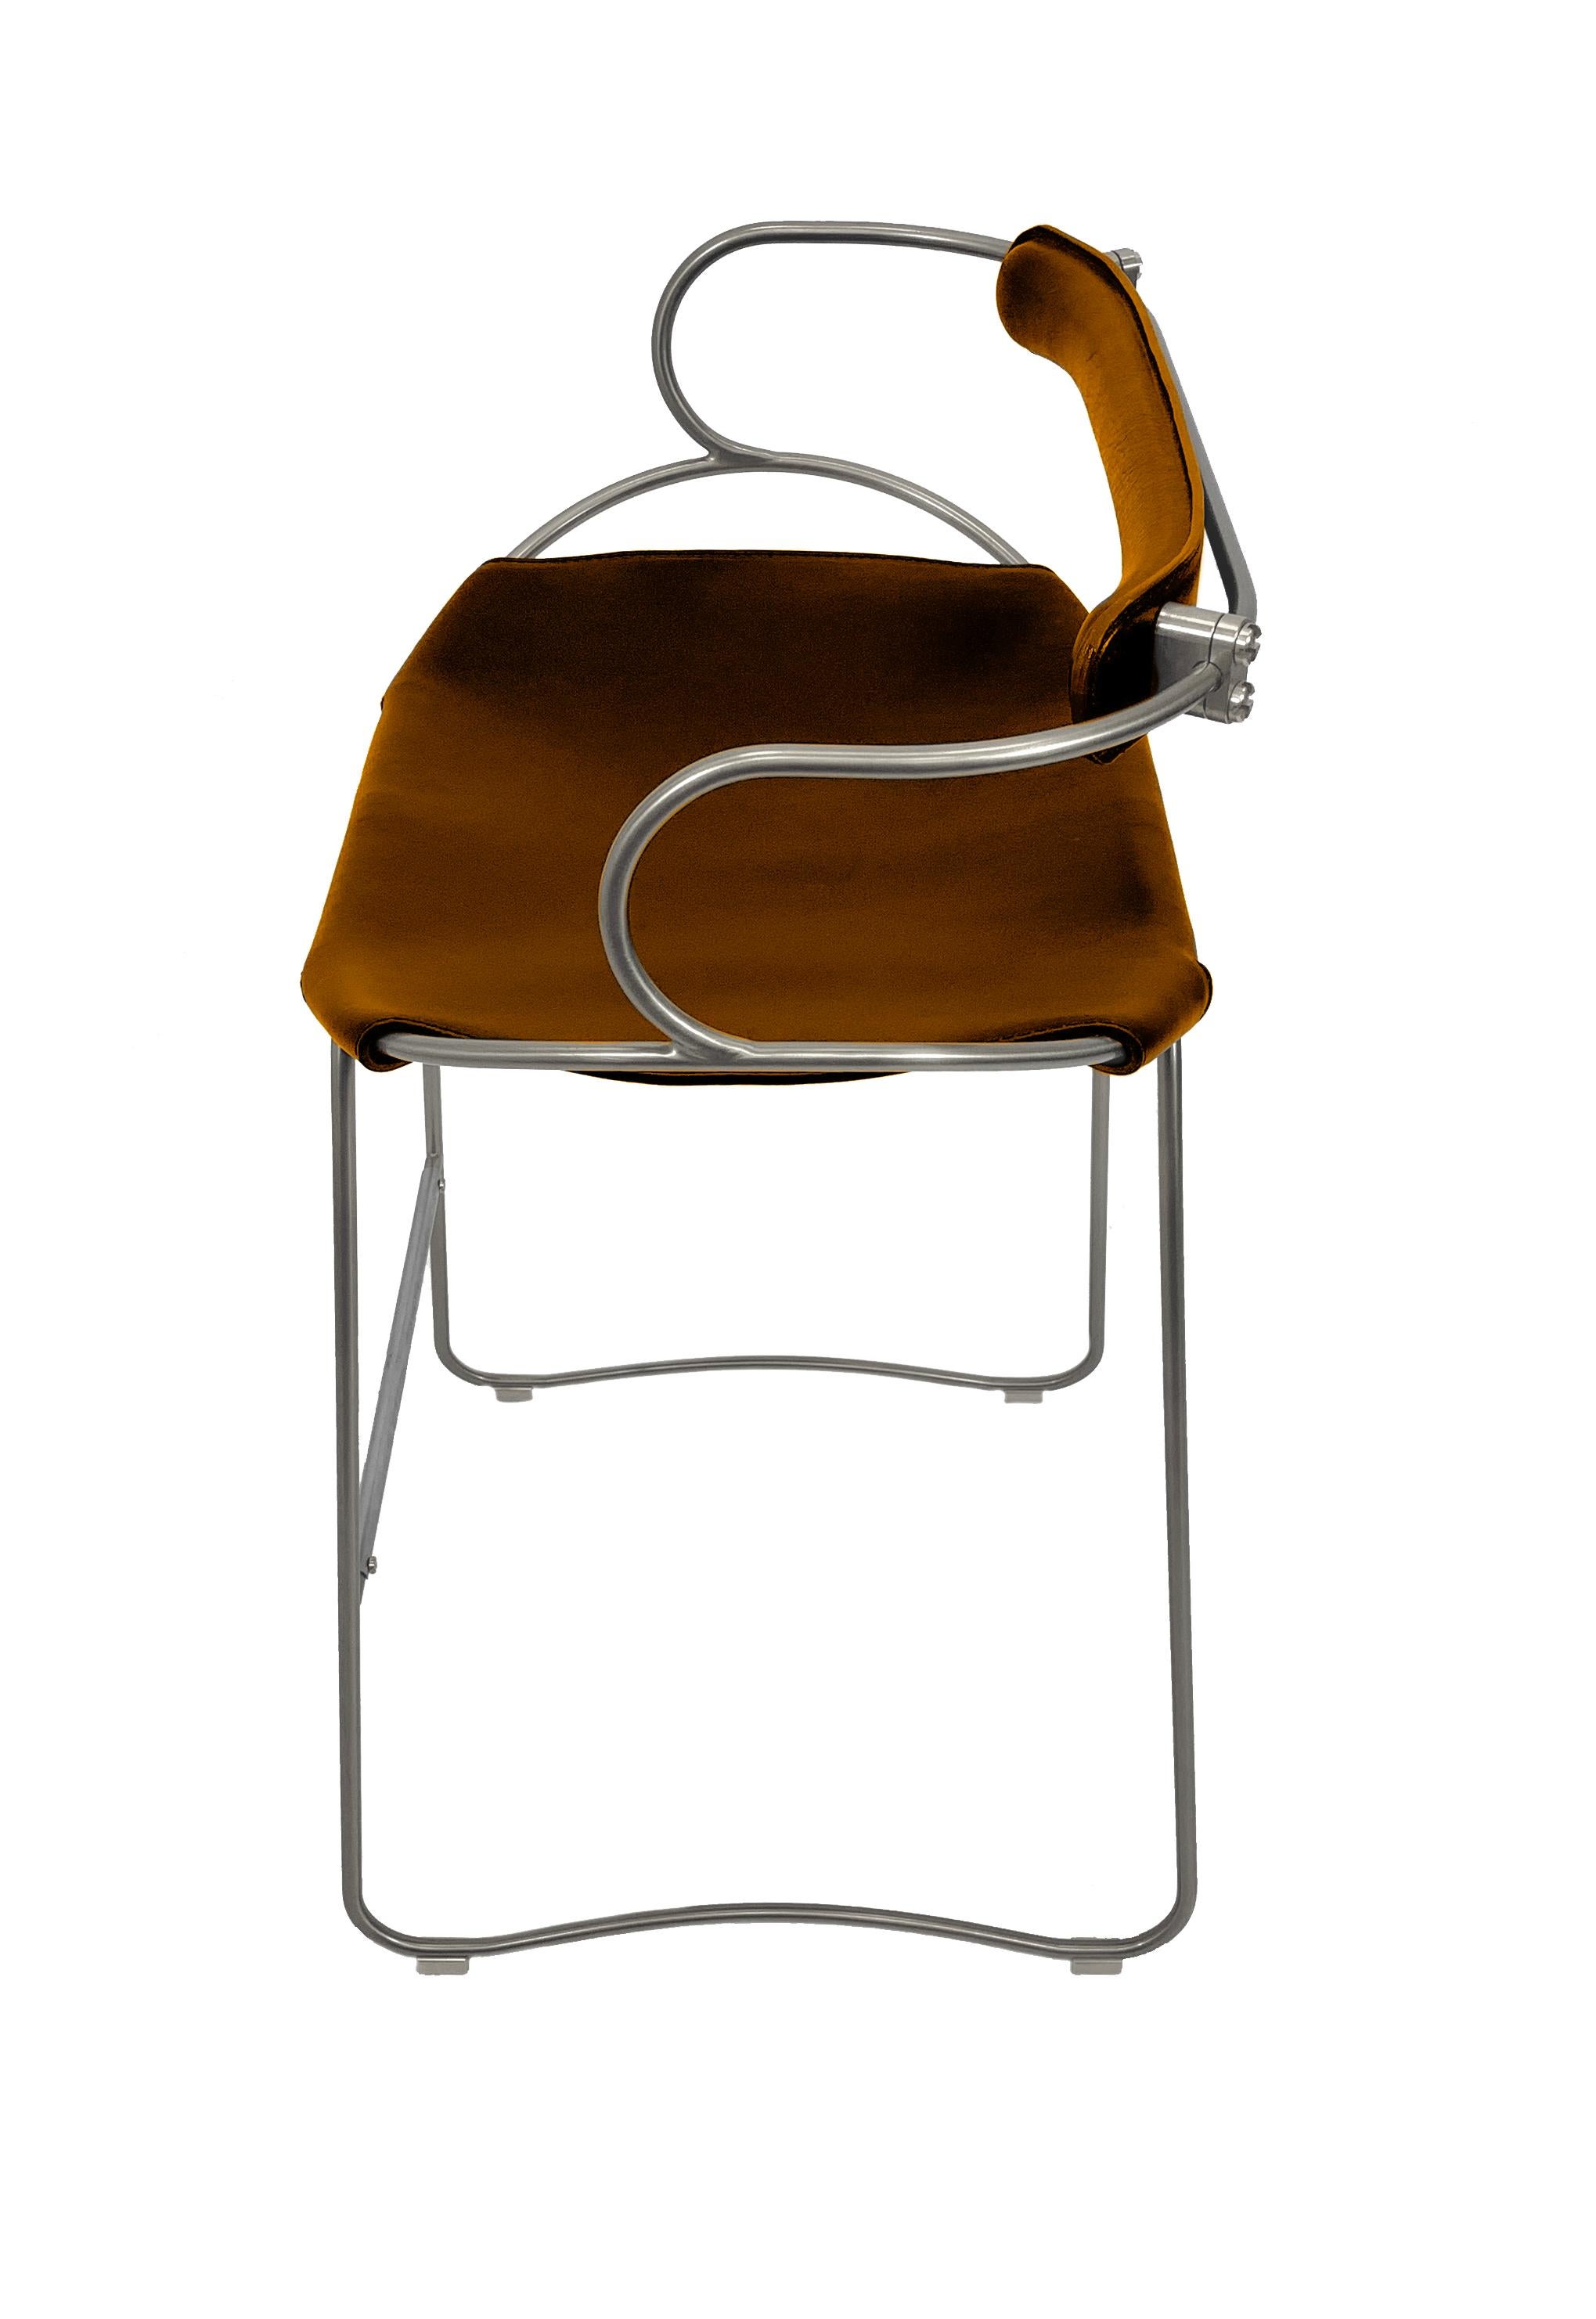 Hug arm bar stool old silver steel and vegetable tanned natural tobacco saddler leather

The hug arm bar stool is designed and conceived with a light aesthetic, the slight oscillation of the steel rod of 14 mm is complemented by the flexibility of